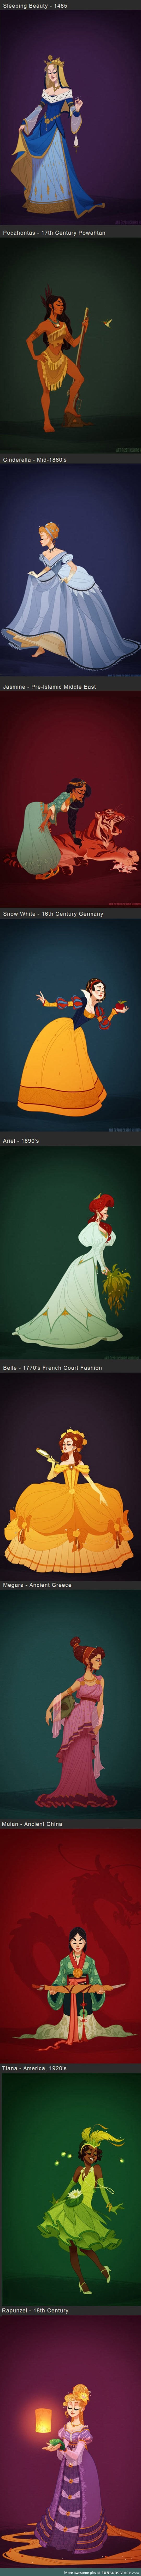 Disney princesses in accurate period clothing